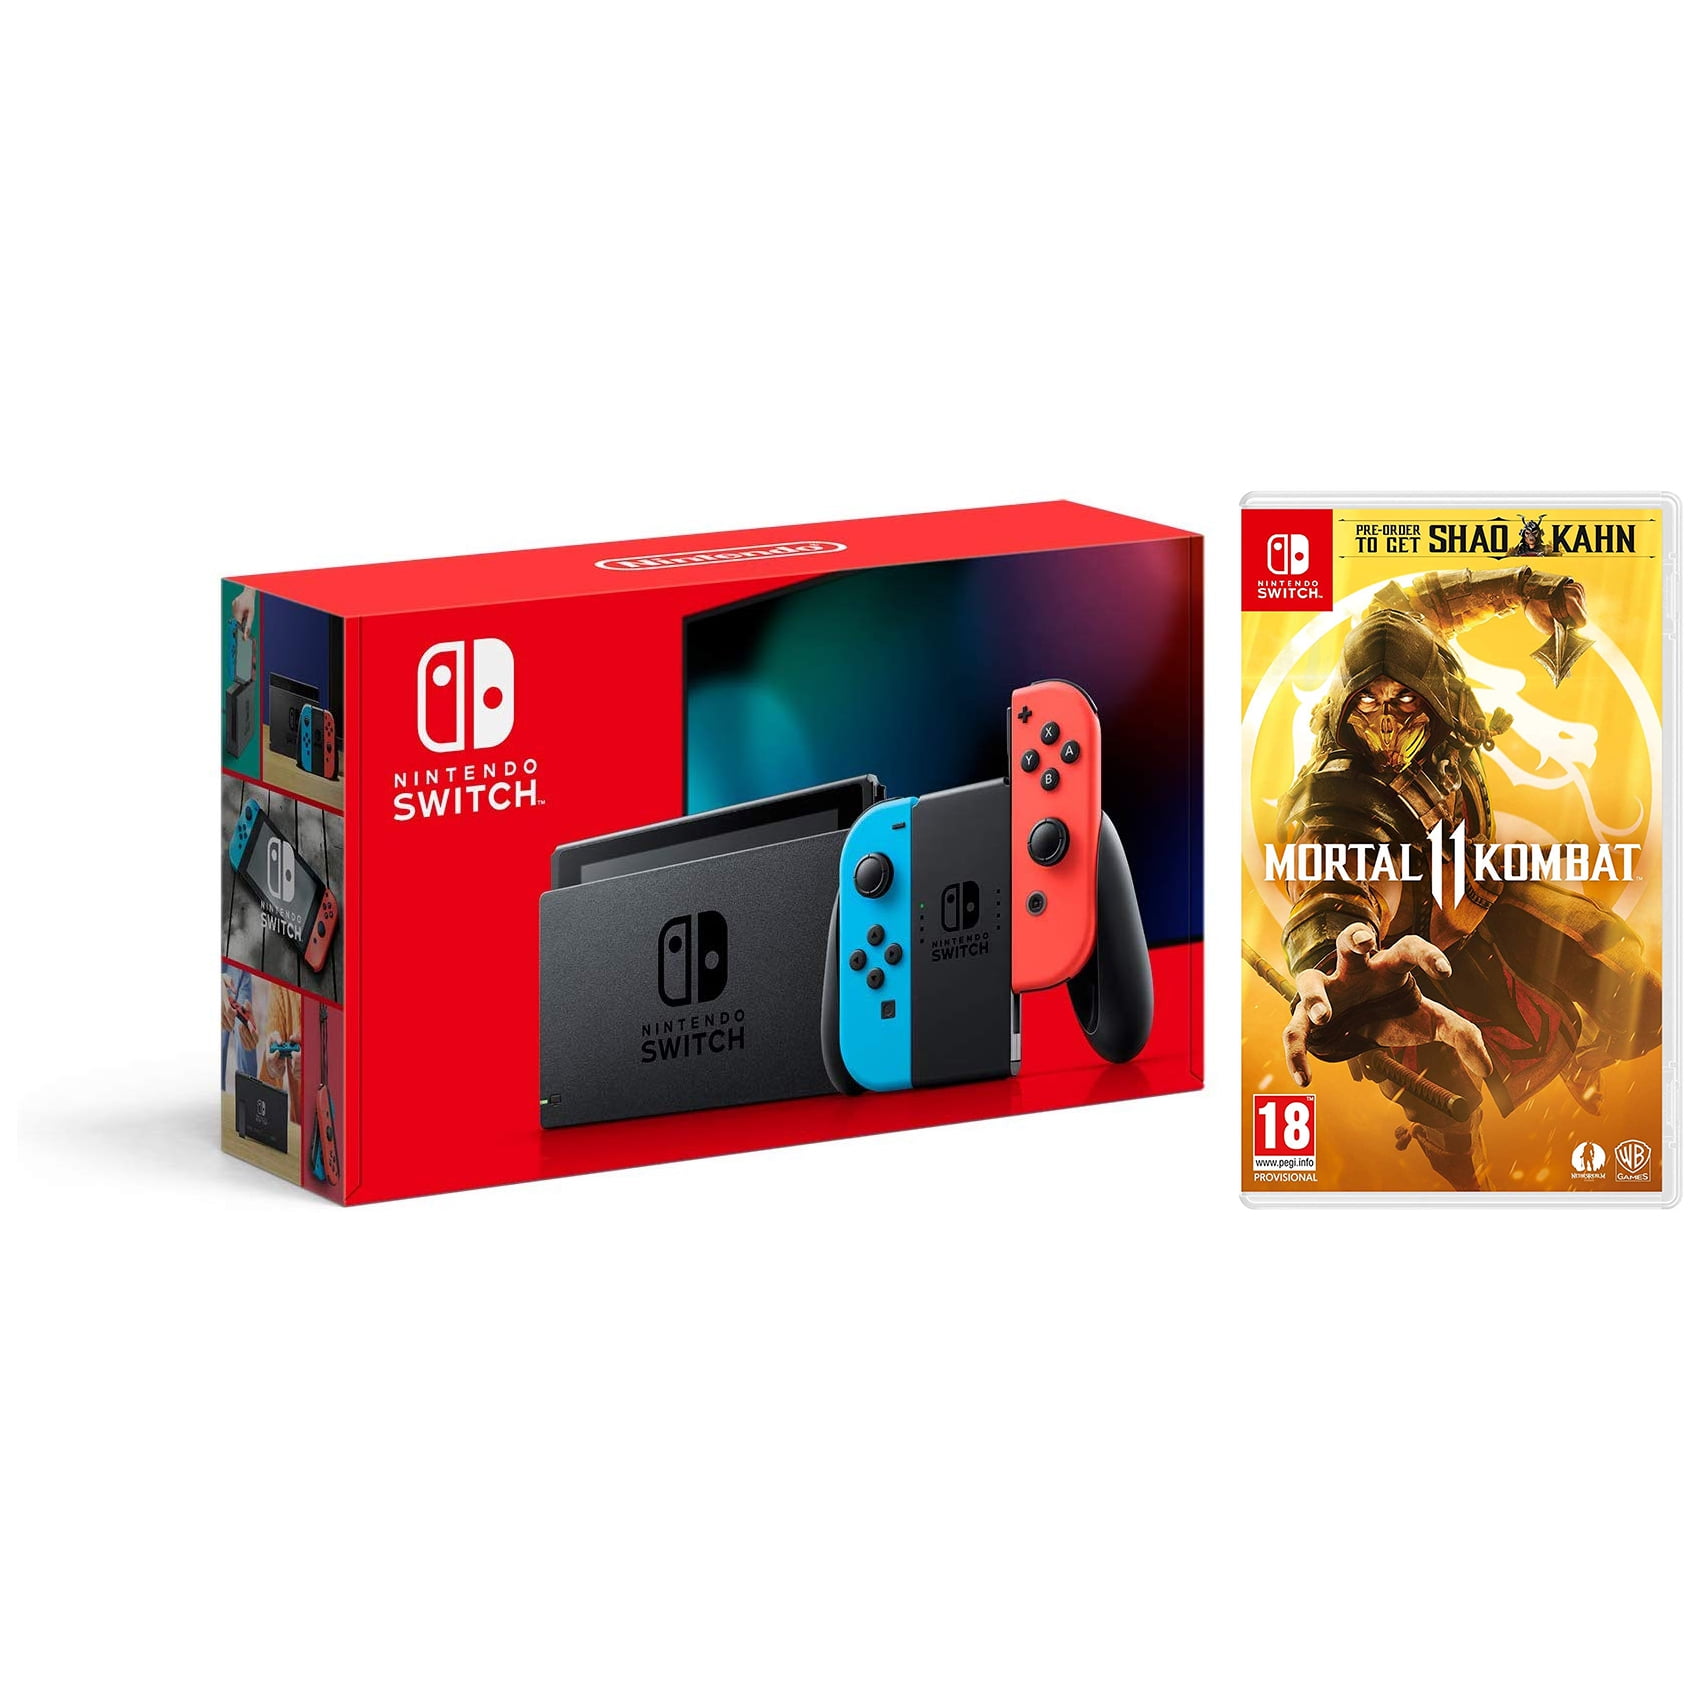 Nintendo Switch Gray Console New 2019 Version with Mortal Kombat 11 Bundle  - Import with US Plug